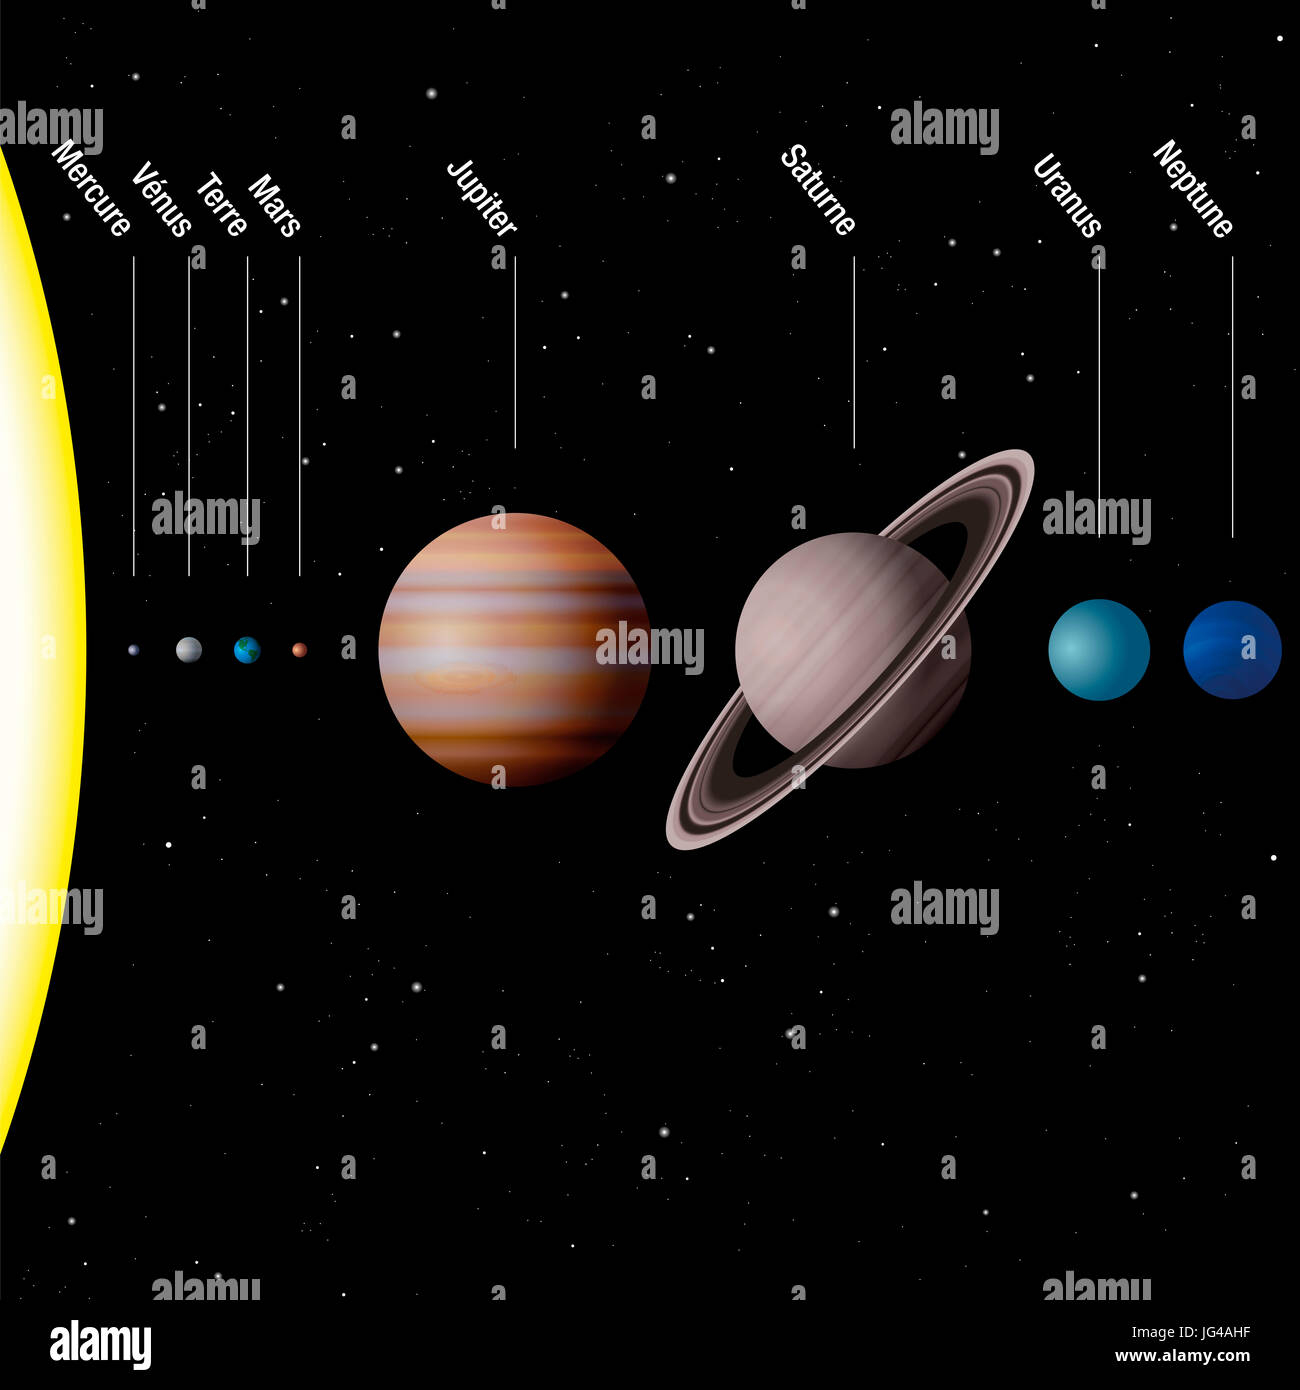 Planets of our solar system, FRENCH NAMES - true to scale - Sun and eight planets Mercury, Venus, Earth, Mars, Jupiter, Saturn, Uranus, Neptune. Stock Photo